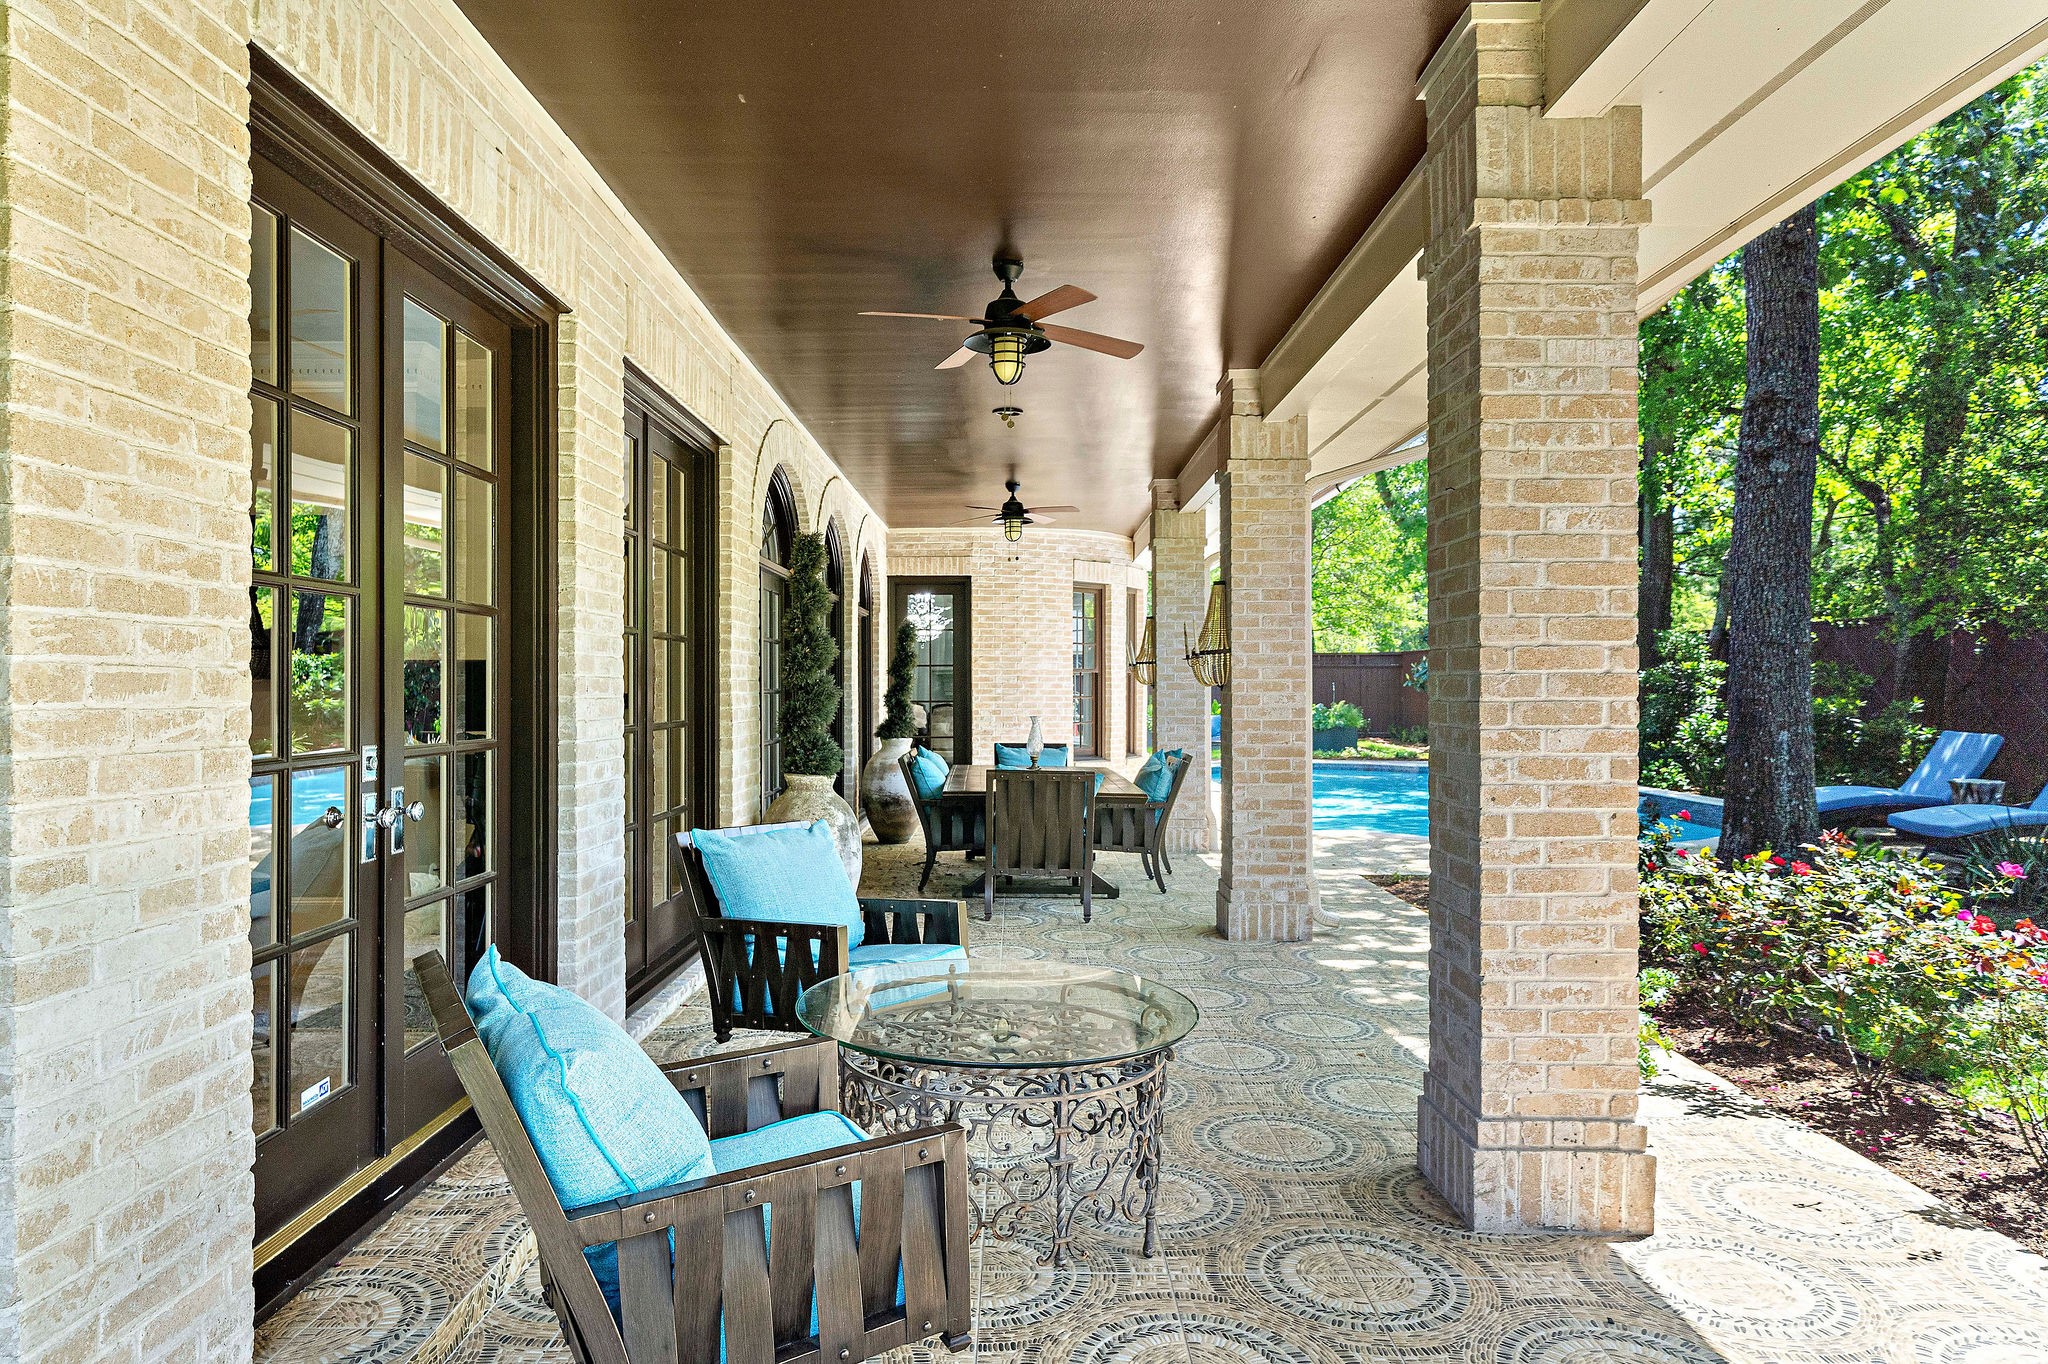 The inviting patio is perfect for entertaining with sitting and dining areas.